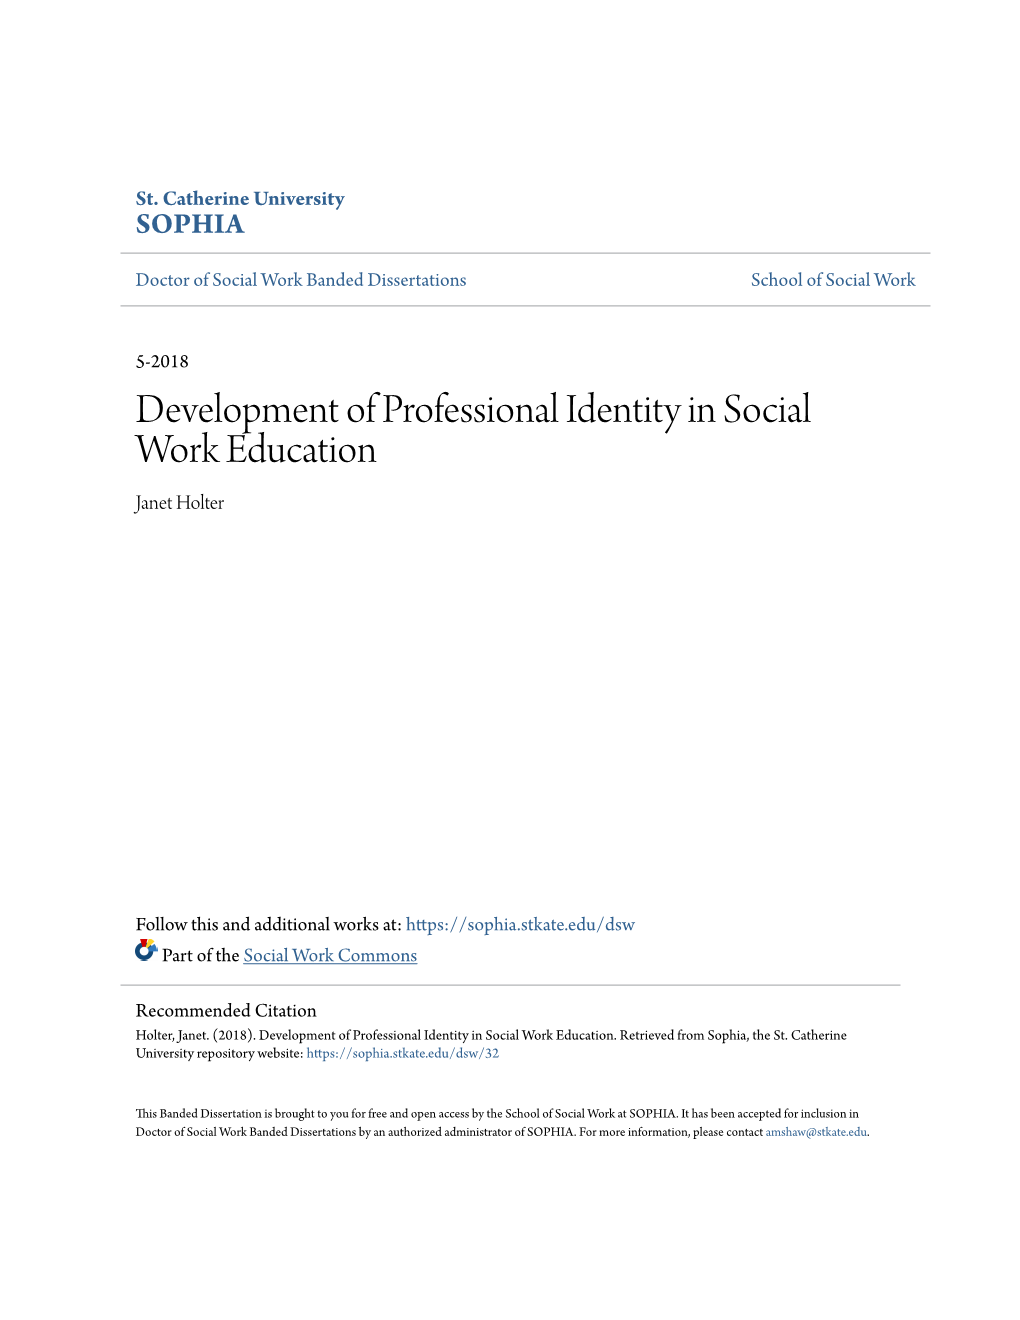 Development of Professional Identity in Social Work Education Janet Holter